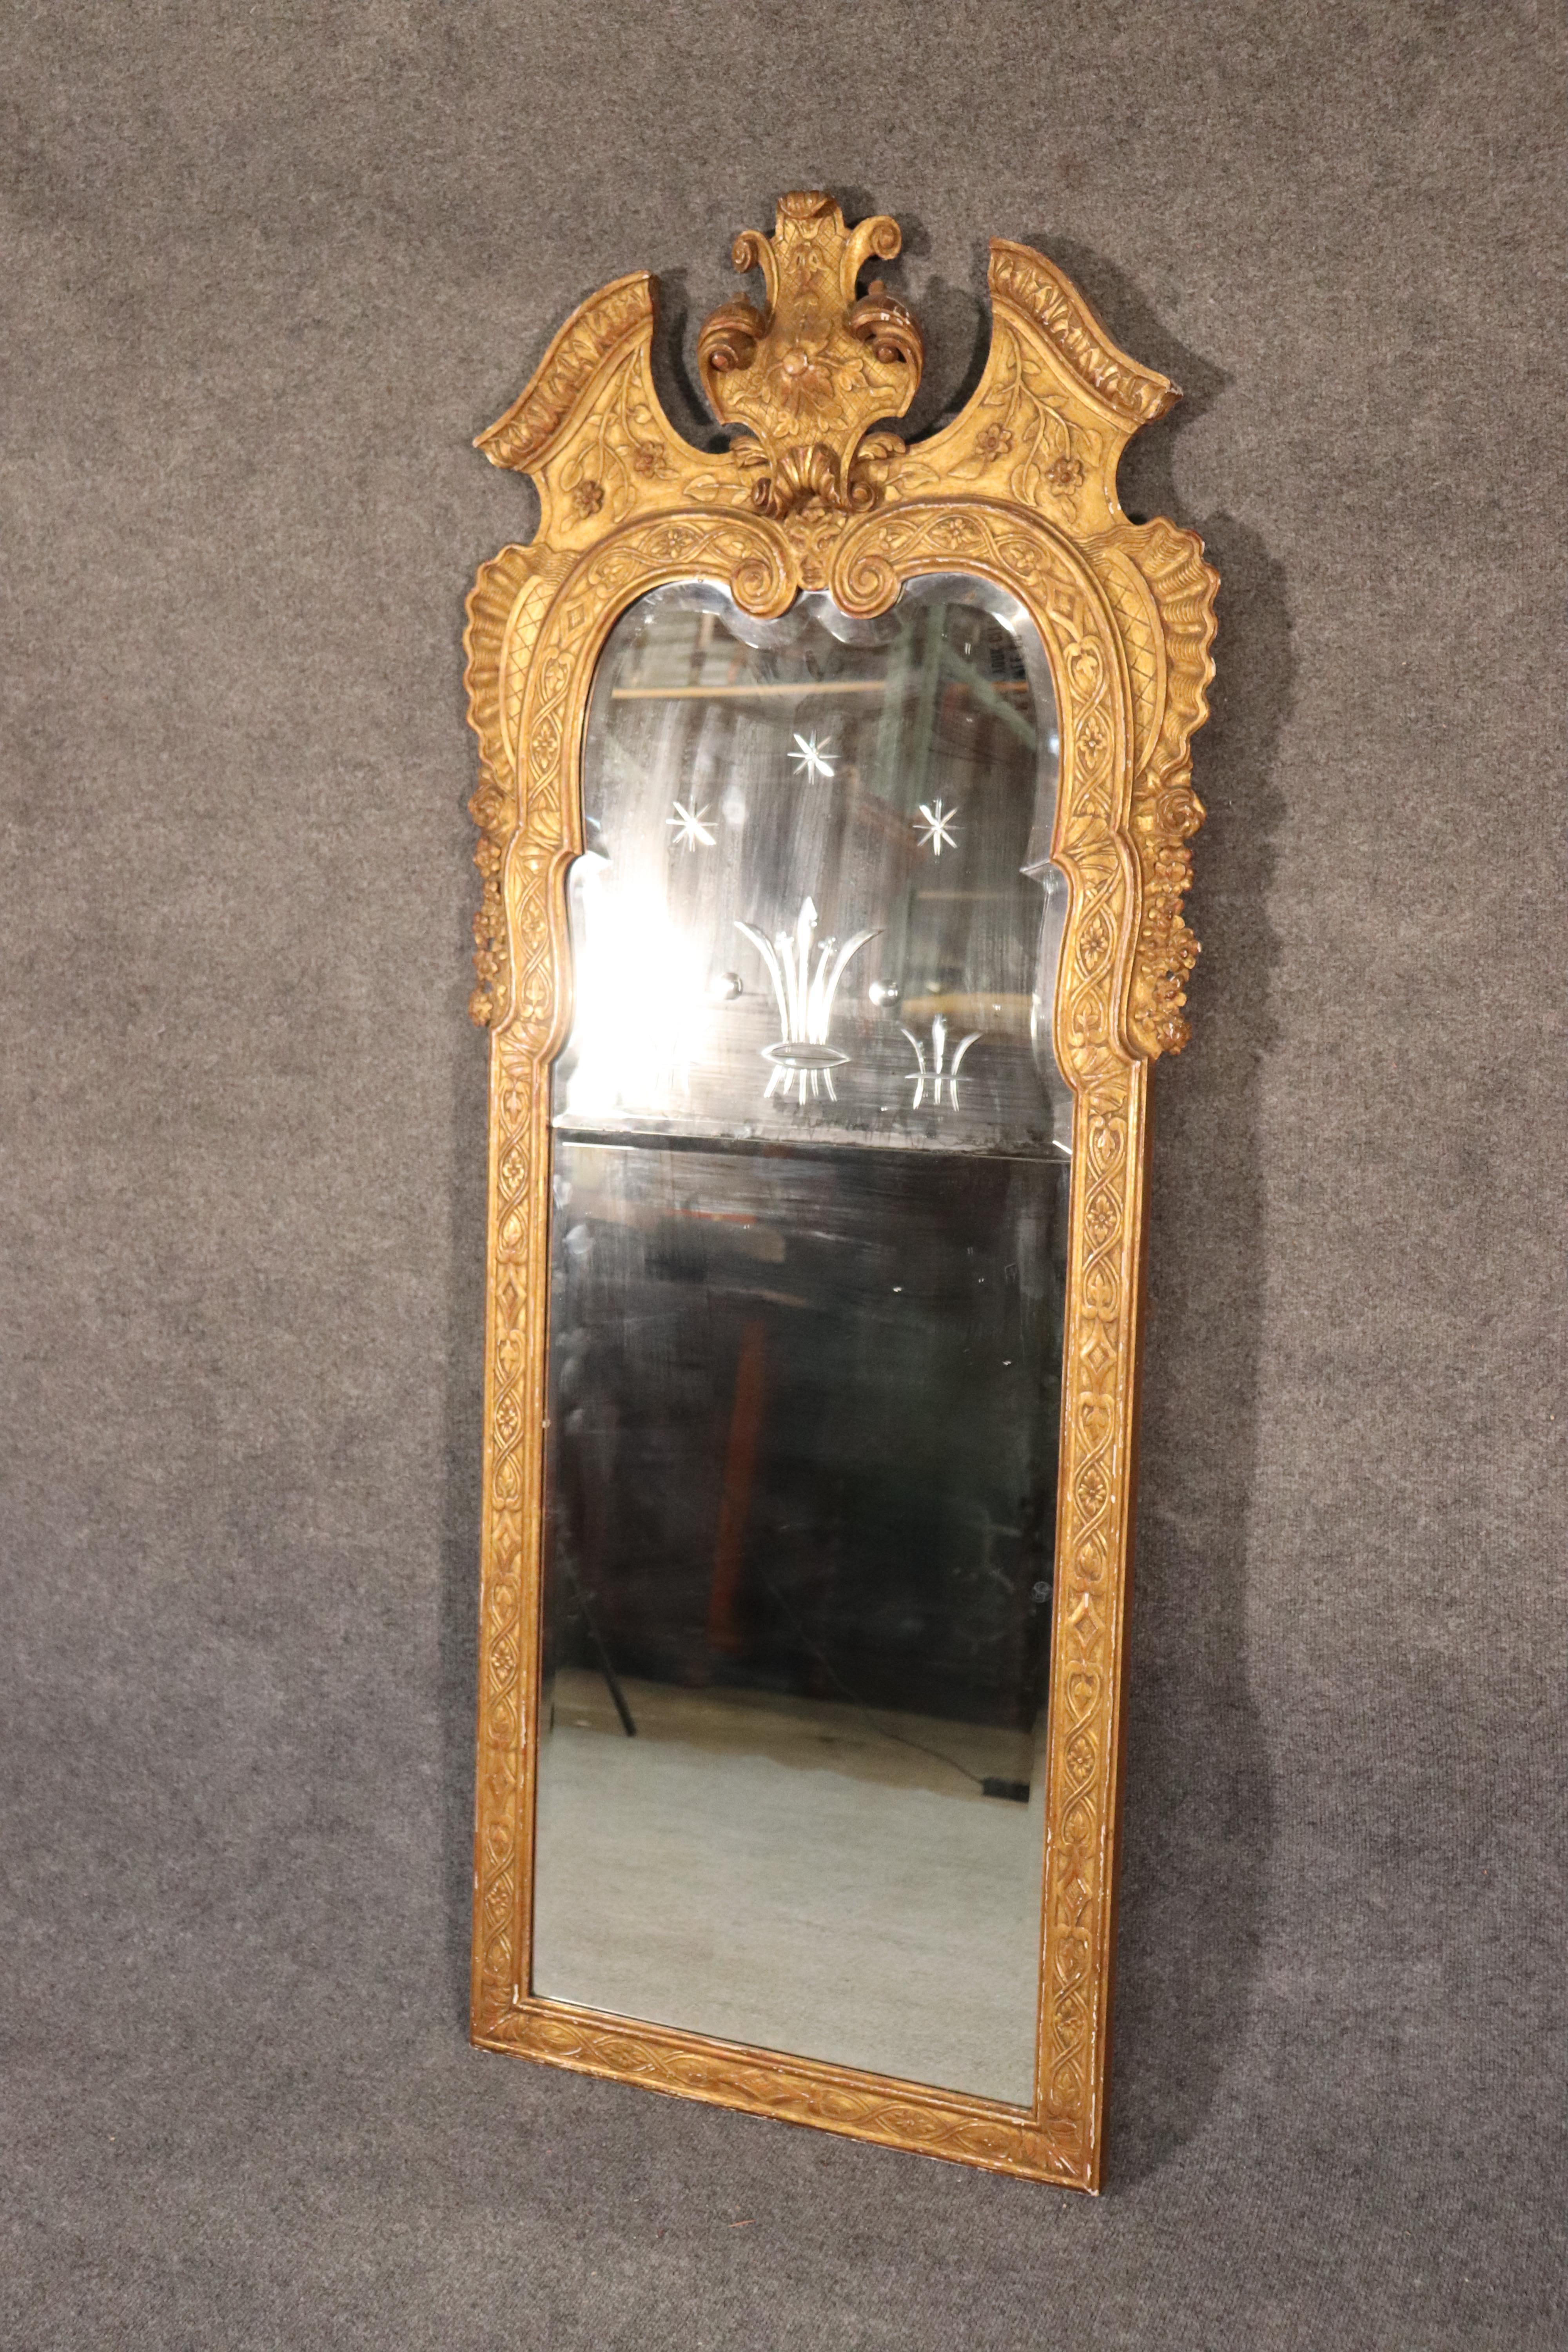 This is a beautiful antique etched and gilded Venetian mirror. The mirror is in good condition with minor signs of age and wear from time. The frame is carved wood with a gorgeous gold leaf finish. The etched glass is simple and sophisticated. The